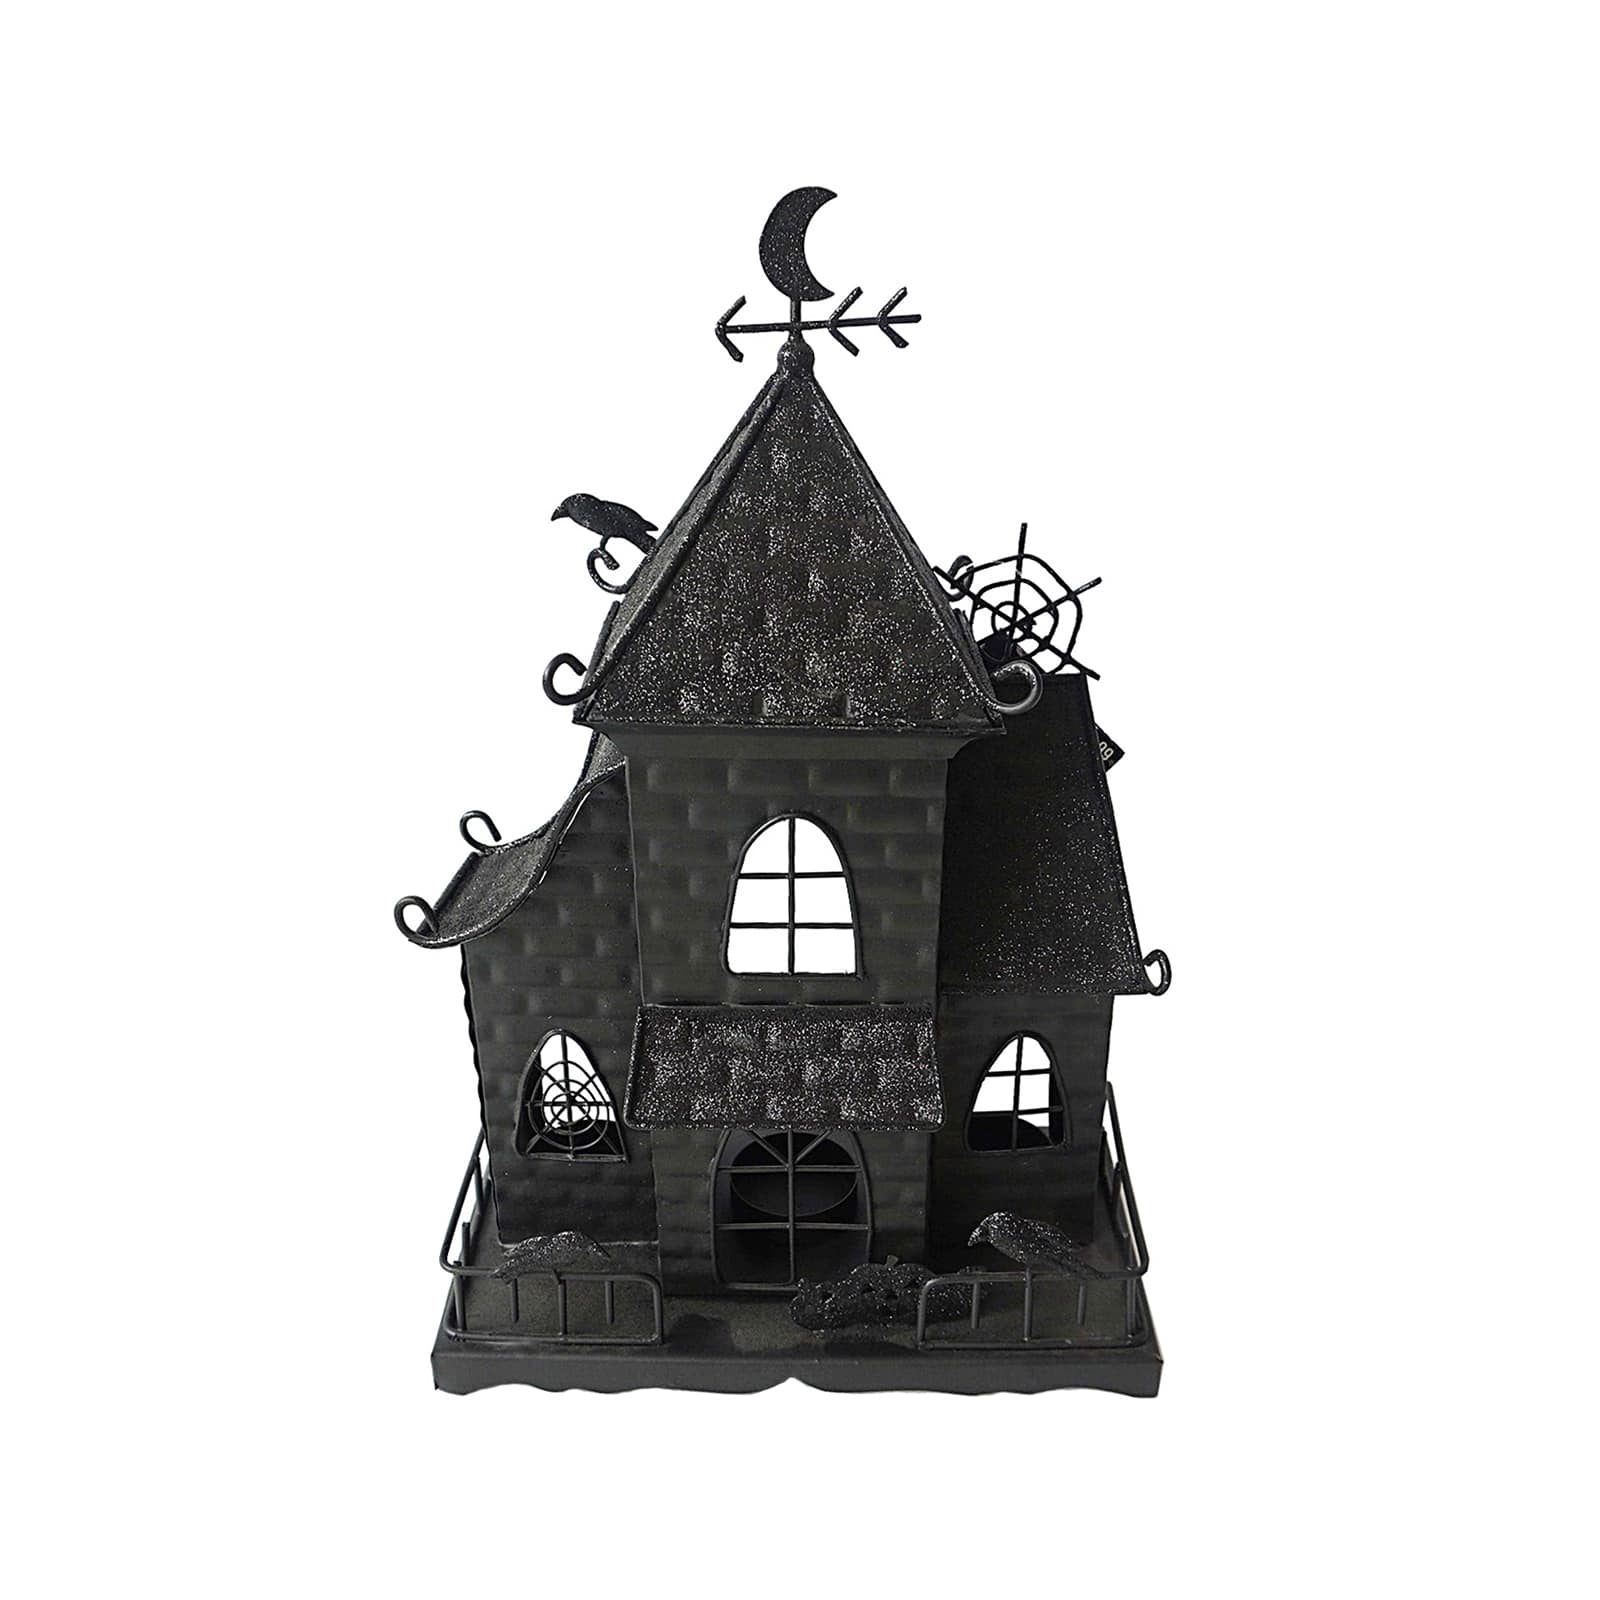 40 Best Pictures Best Place To Buy Halloween Decorations / Halloween Decorations: 31 of the Best Halloween Decor at ...